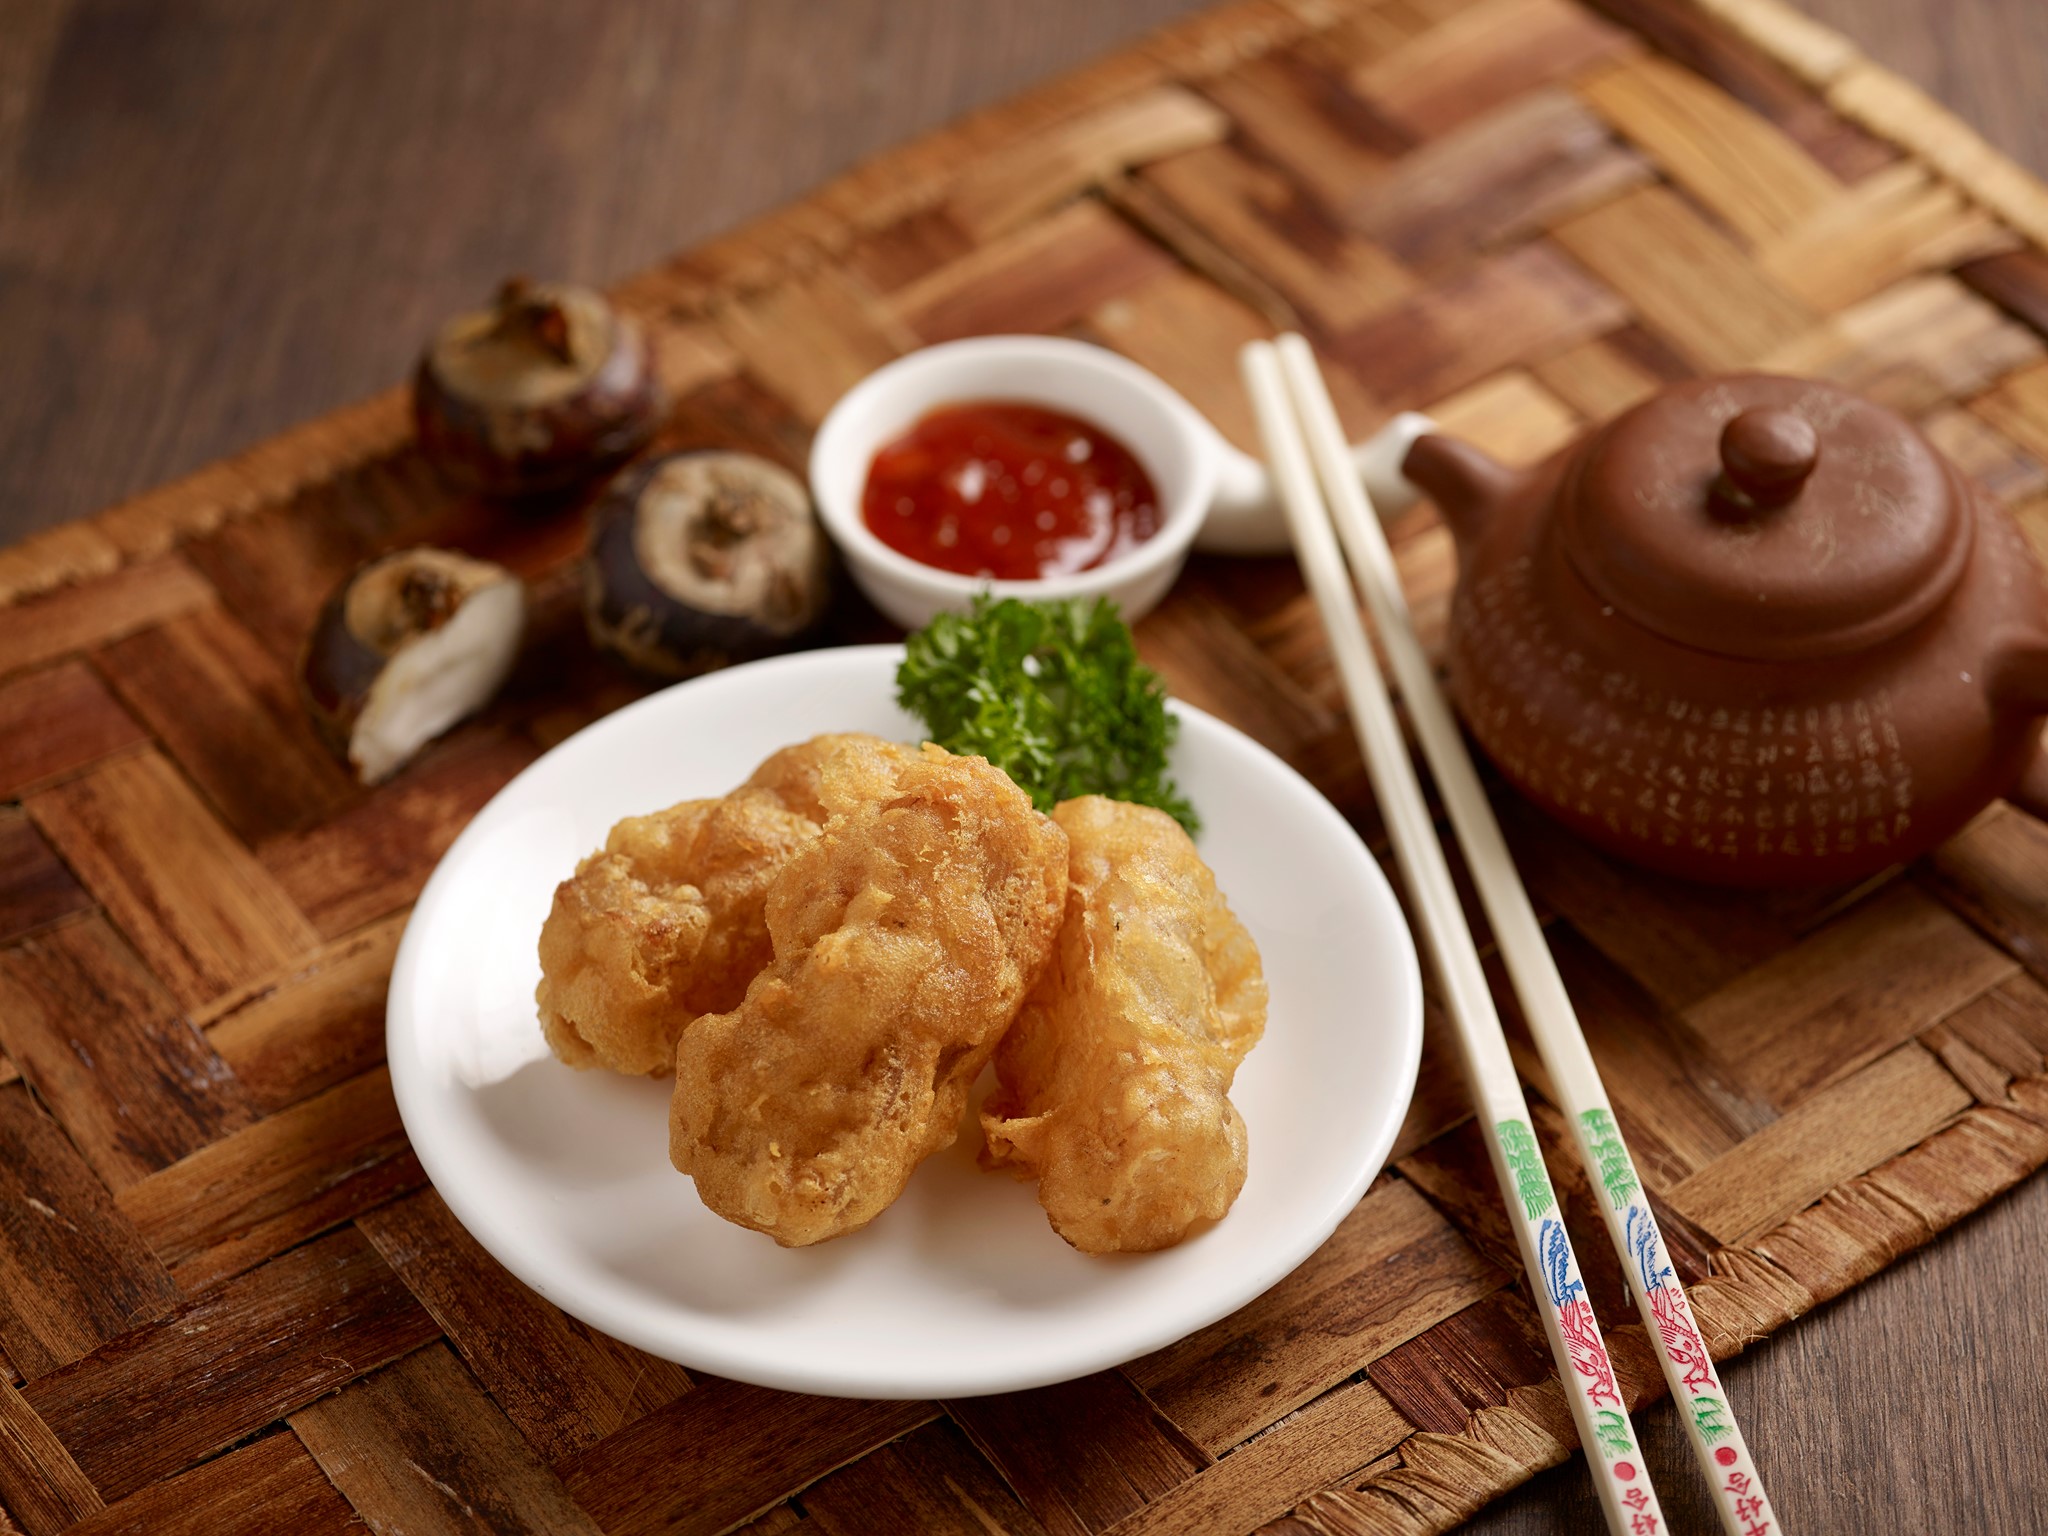 $19.90++ All-You-Can-Eat Dim Sum Buffet Promo at Soup Restaurant Changi Airport from 11 – 30 Nov 20 - 5